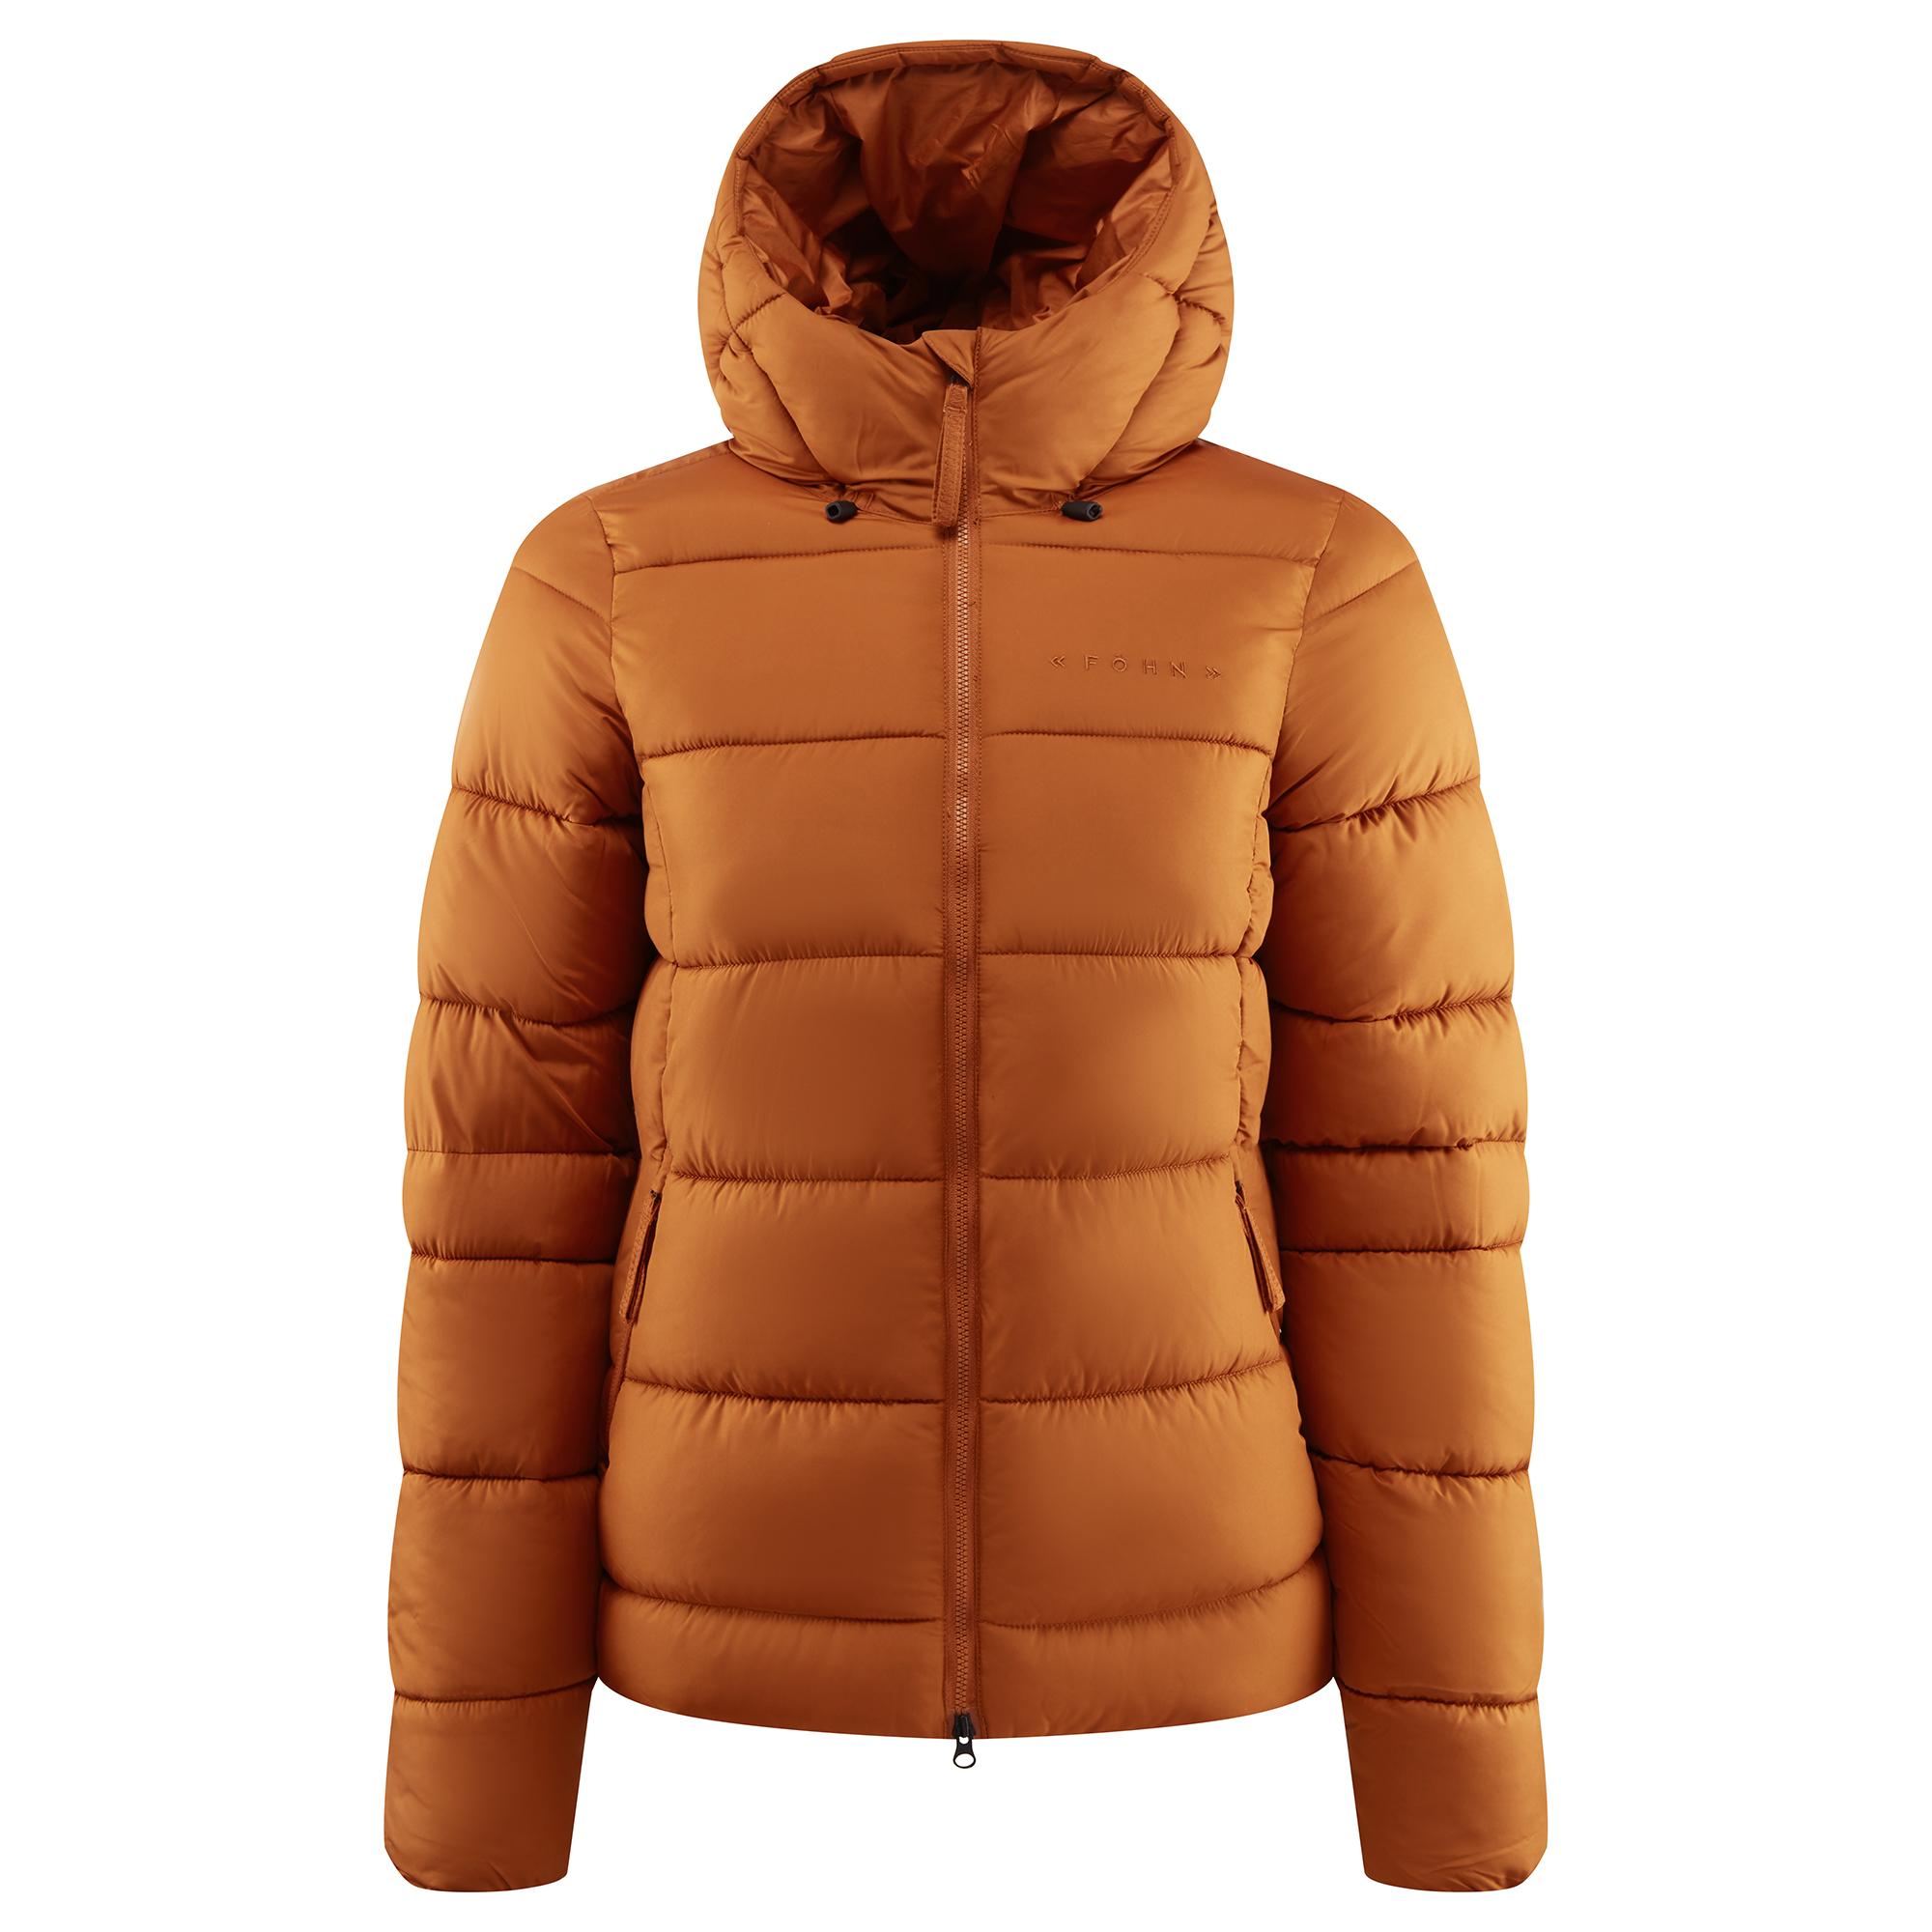 Fhn Womens Macro Synthetic Down Jacket - Umber